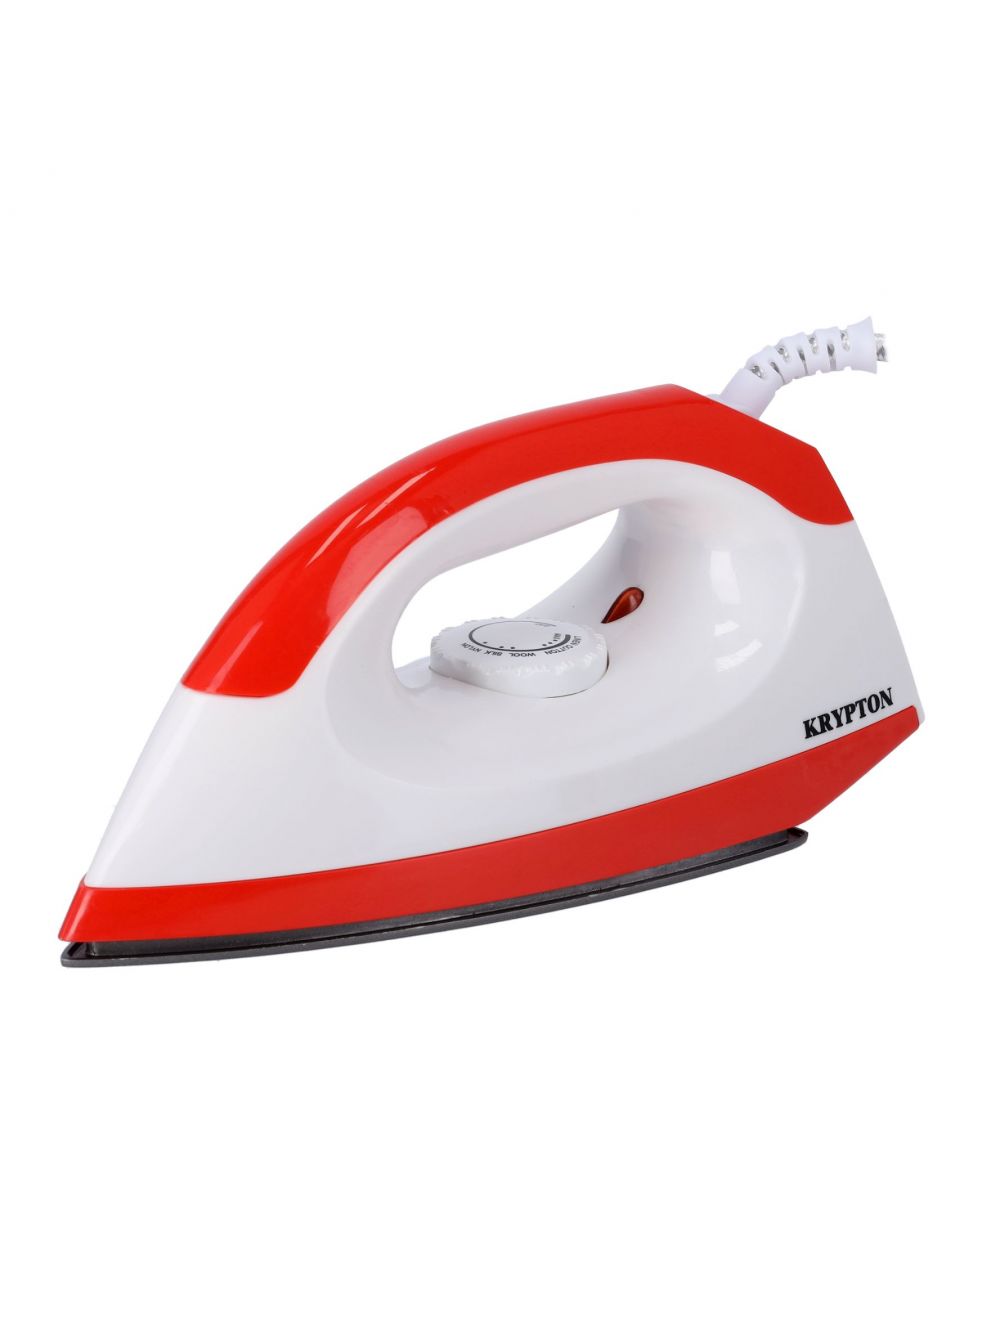 Krypton 1200W Dry Iron for Perfectly Crisp Ironed Clothes -KNDI6001